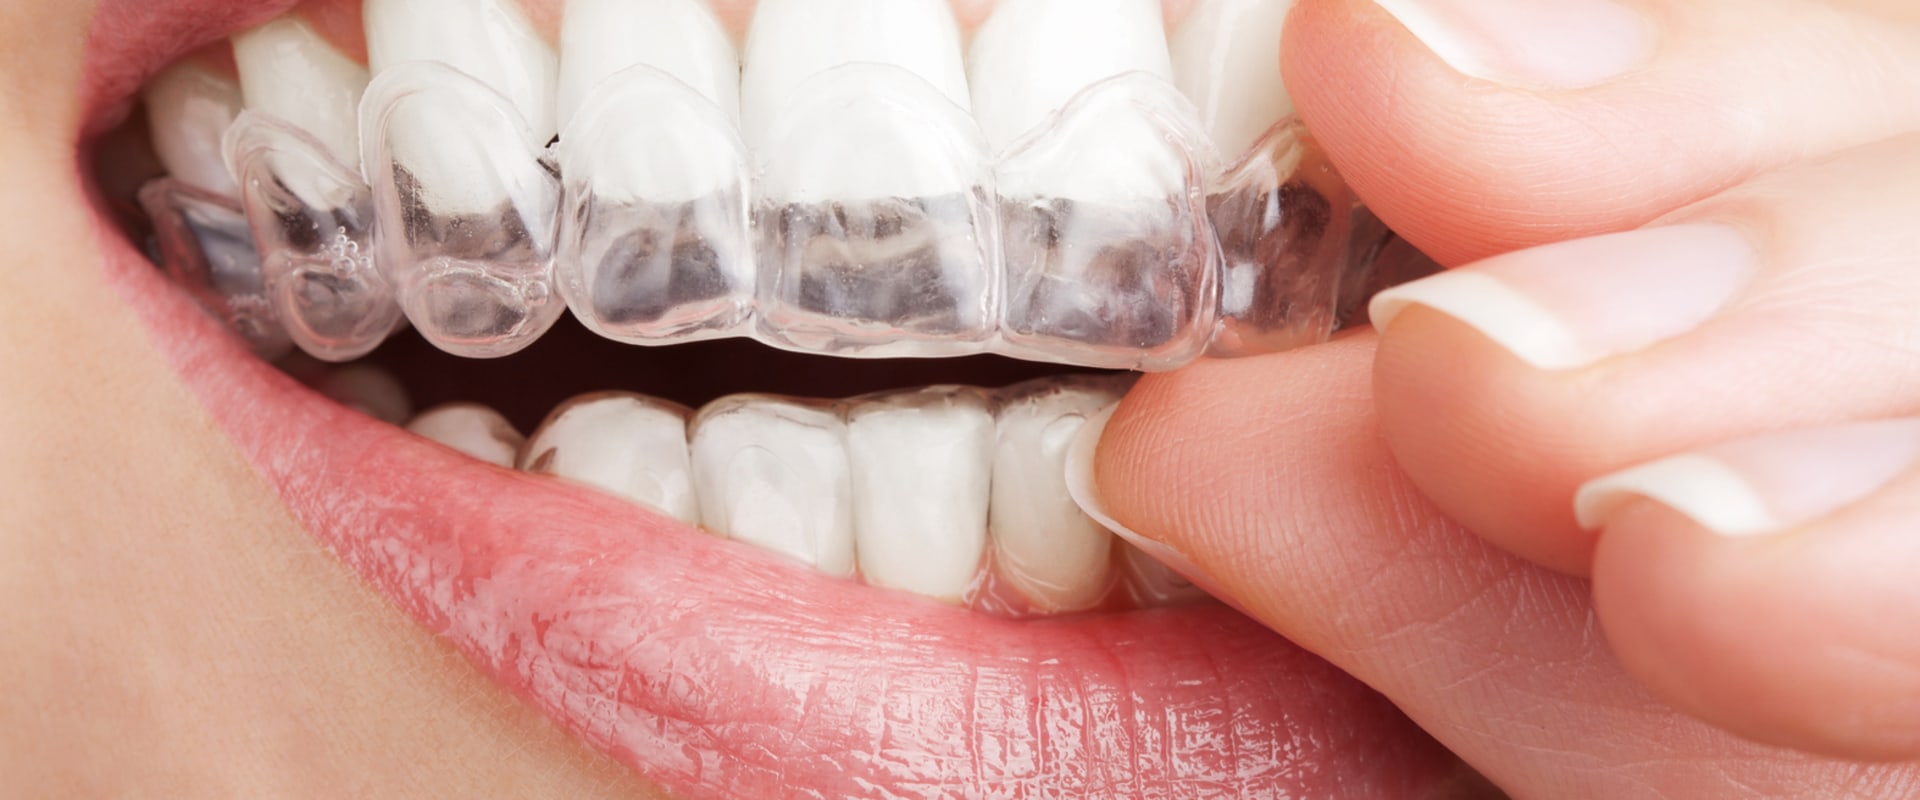 How Often Should You Change Your Invisalign Trays?